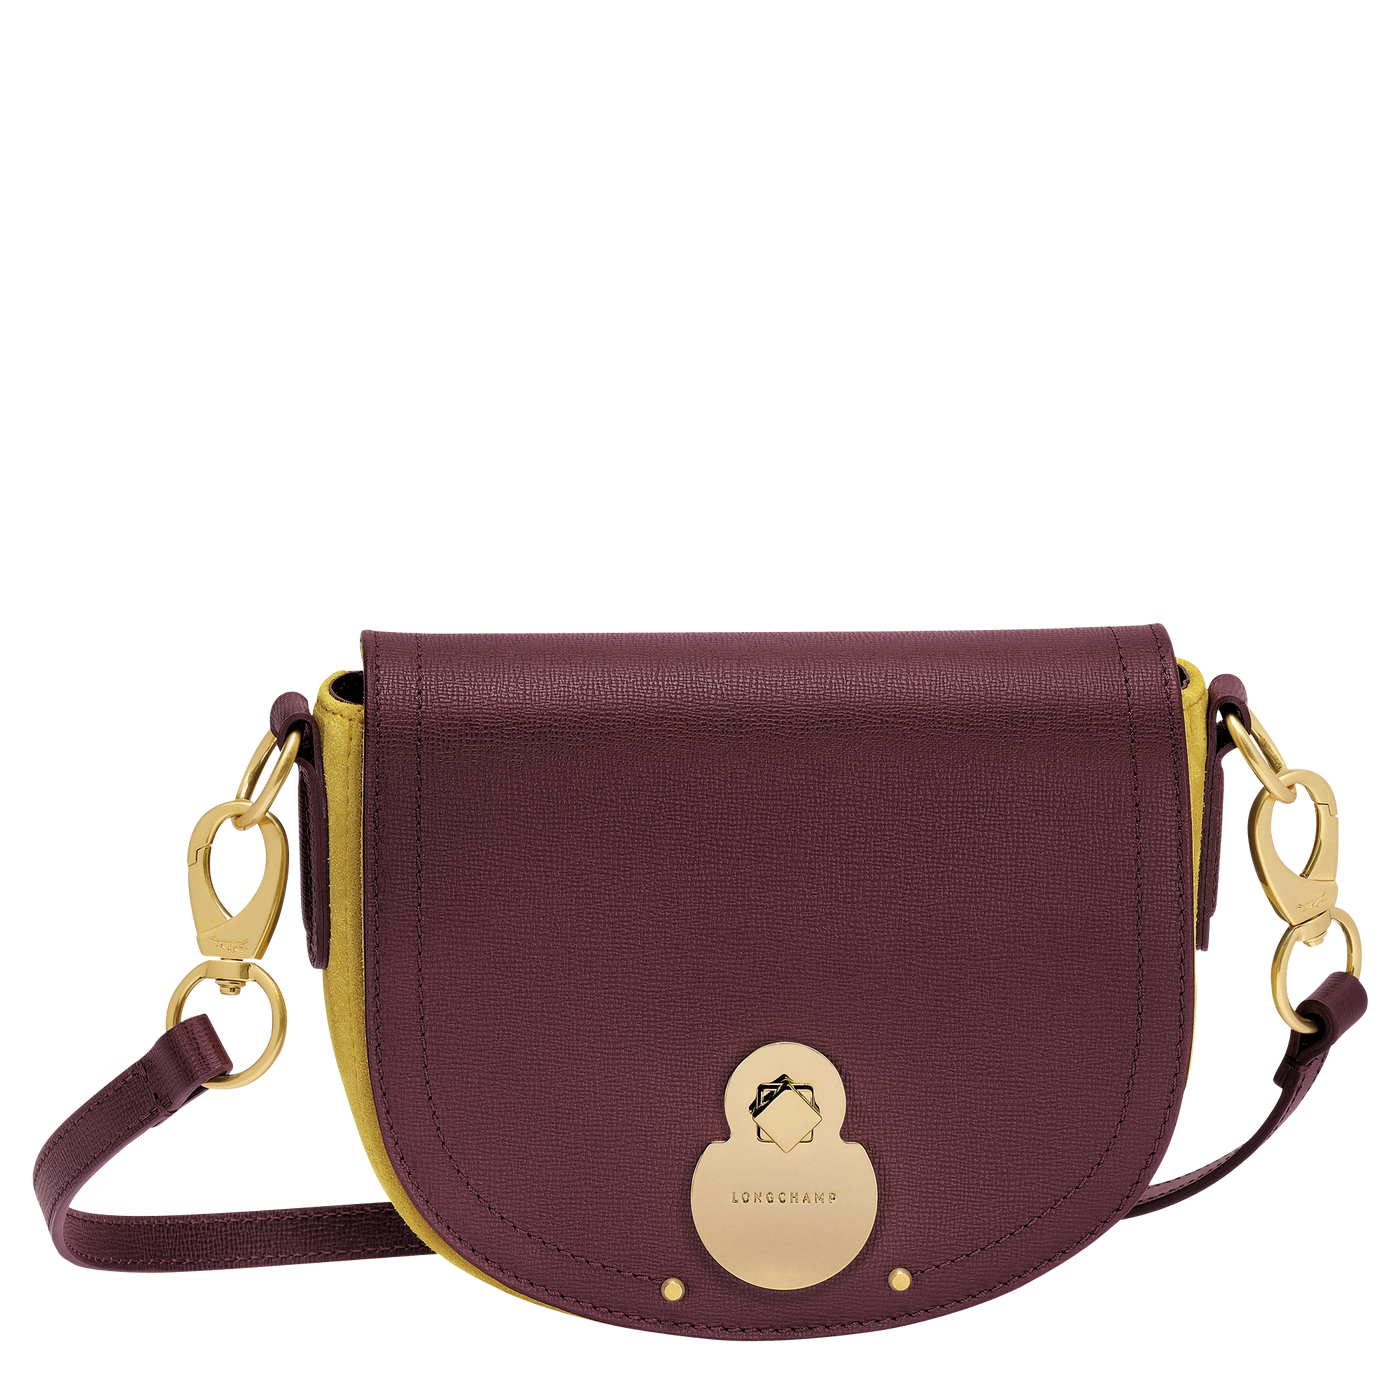 Shop The Latest Collection Of Outlet - Longchamp Cavalcade Wild Cross Body Bag-1395Hnb In Lebanon